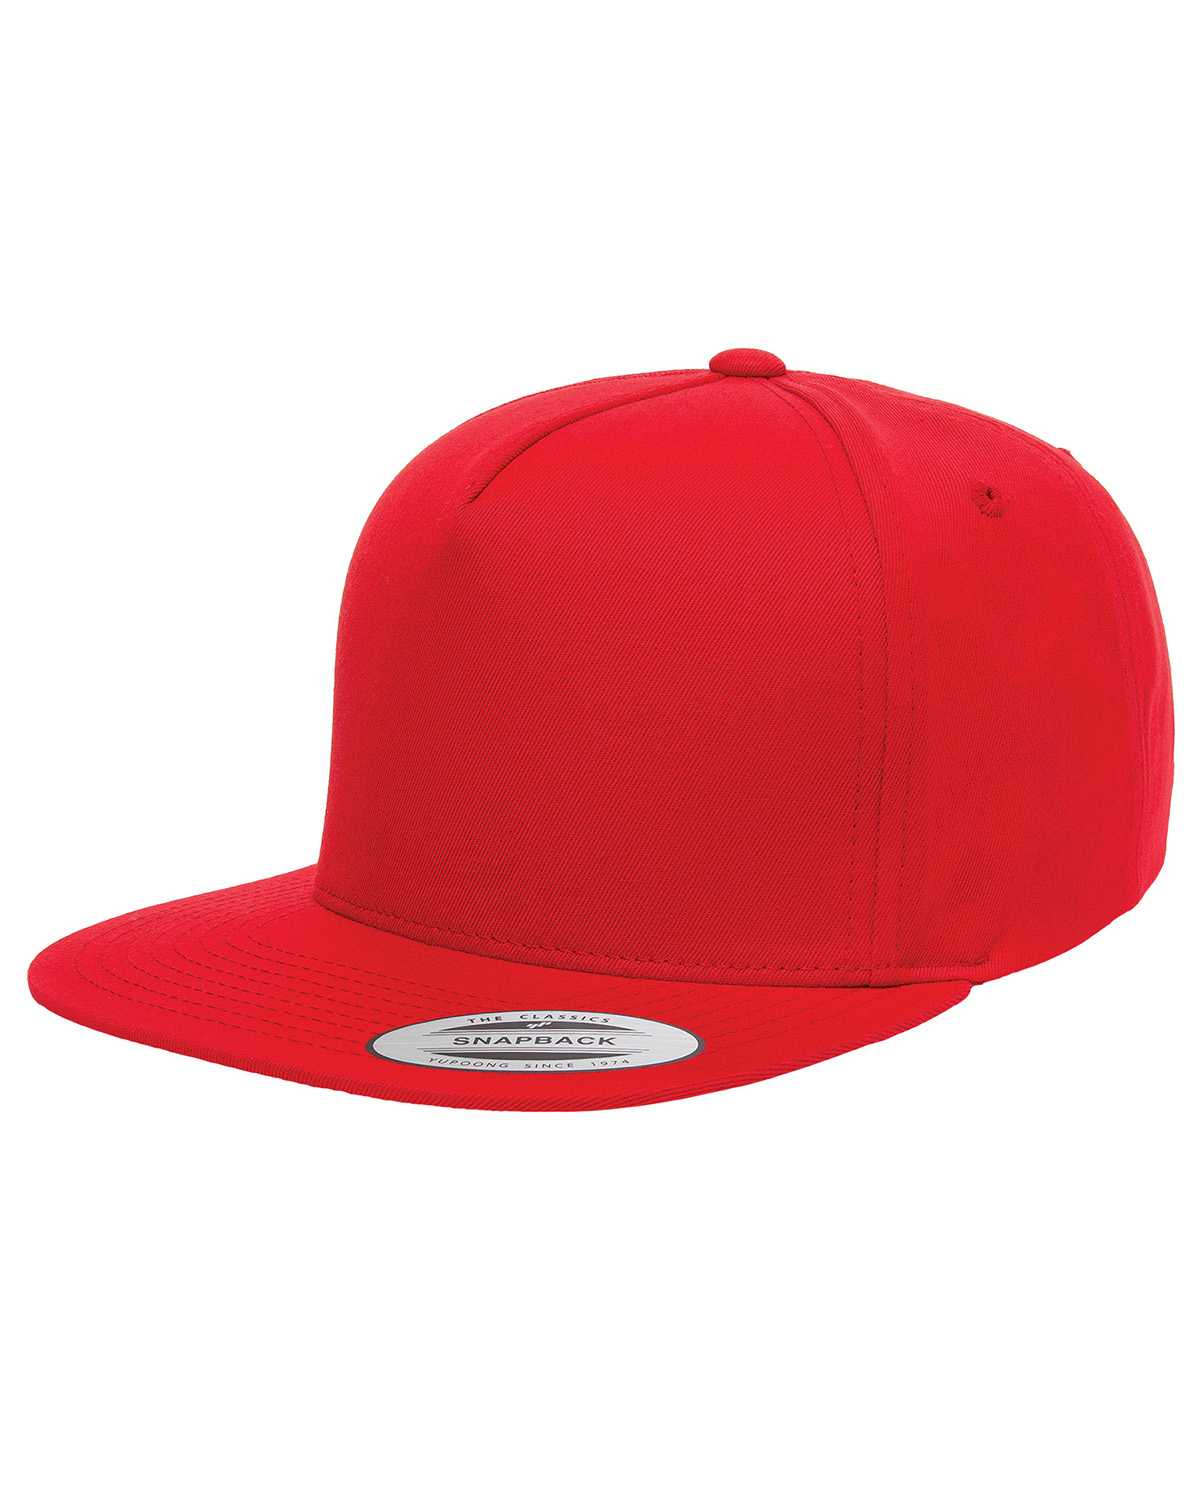 Yupoong Y6007 Adult 5-Panel Cotton Twill Snapback Cap | ApparelChoice.com